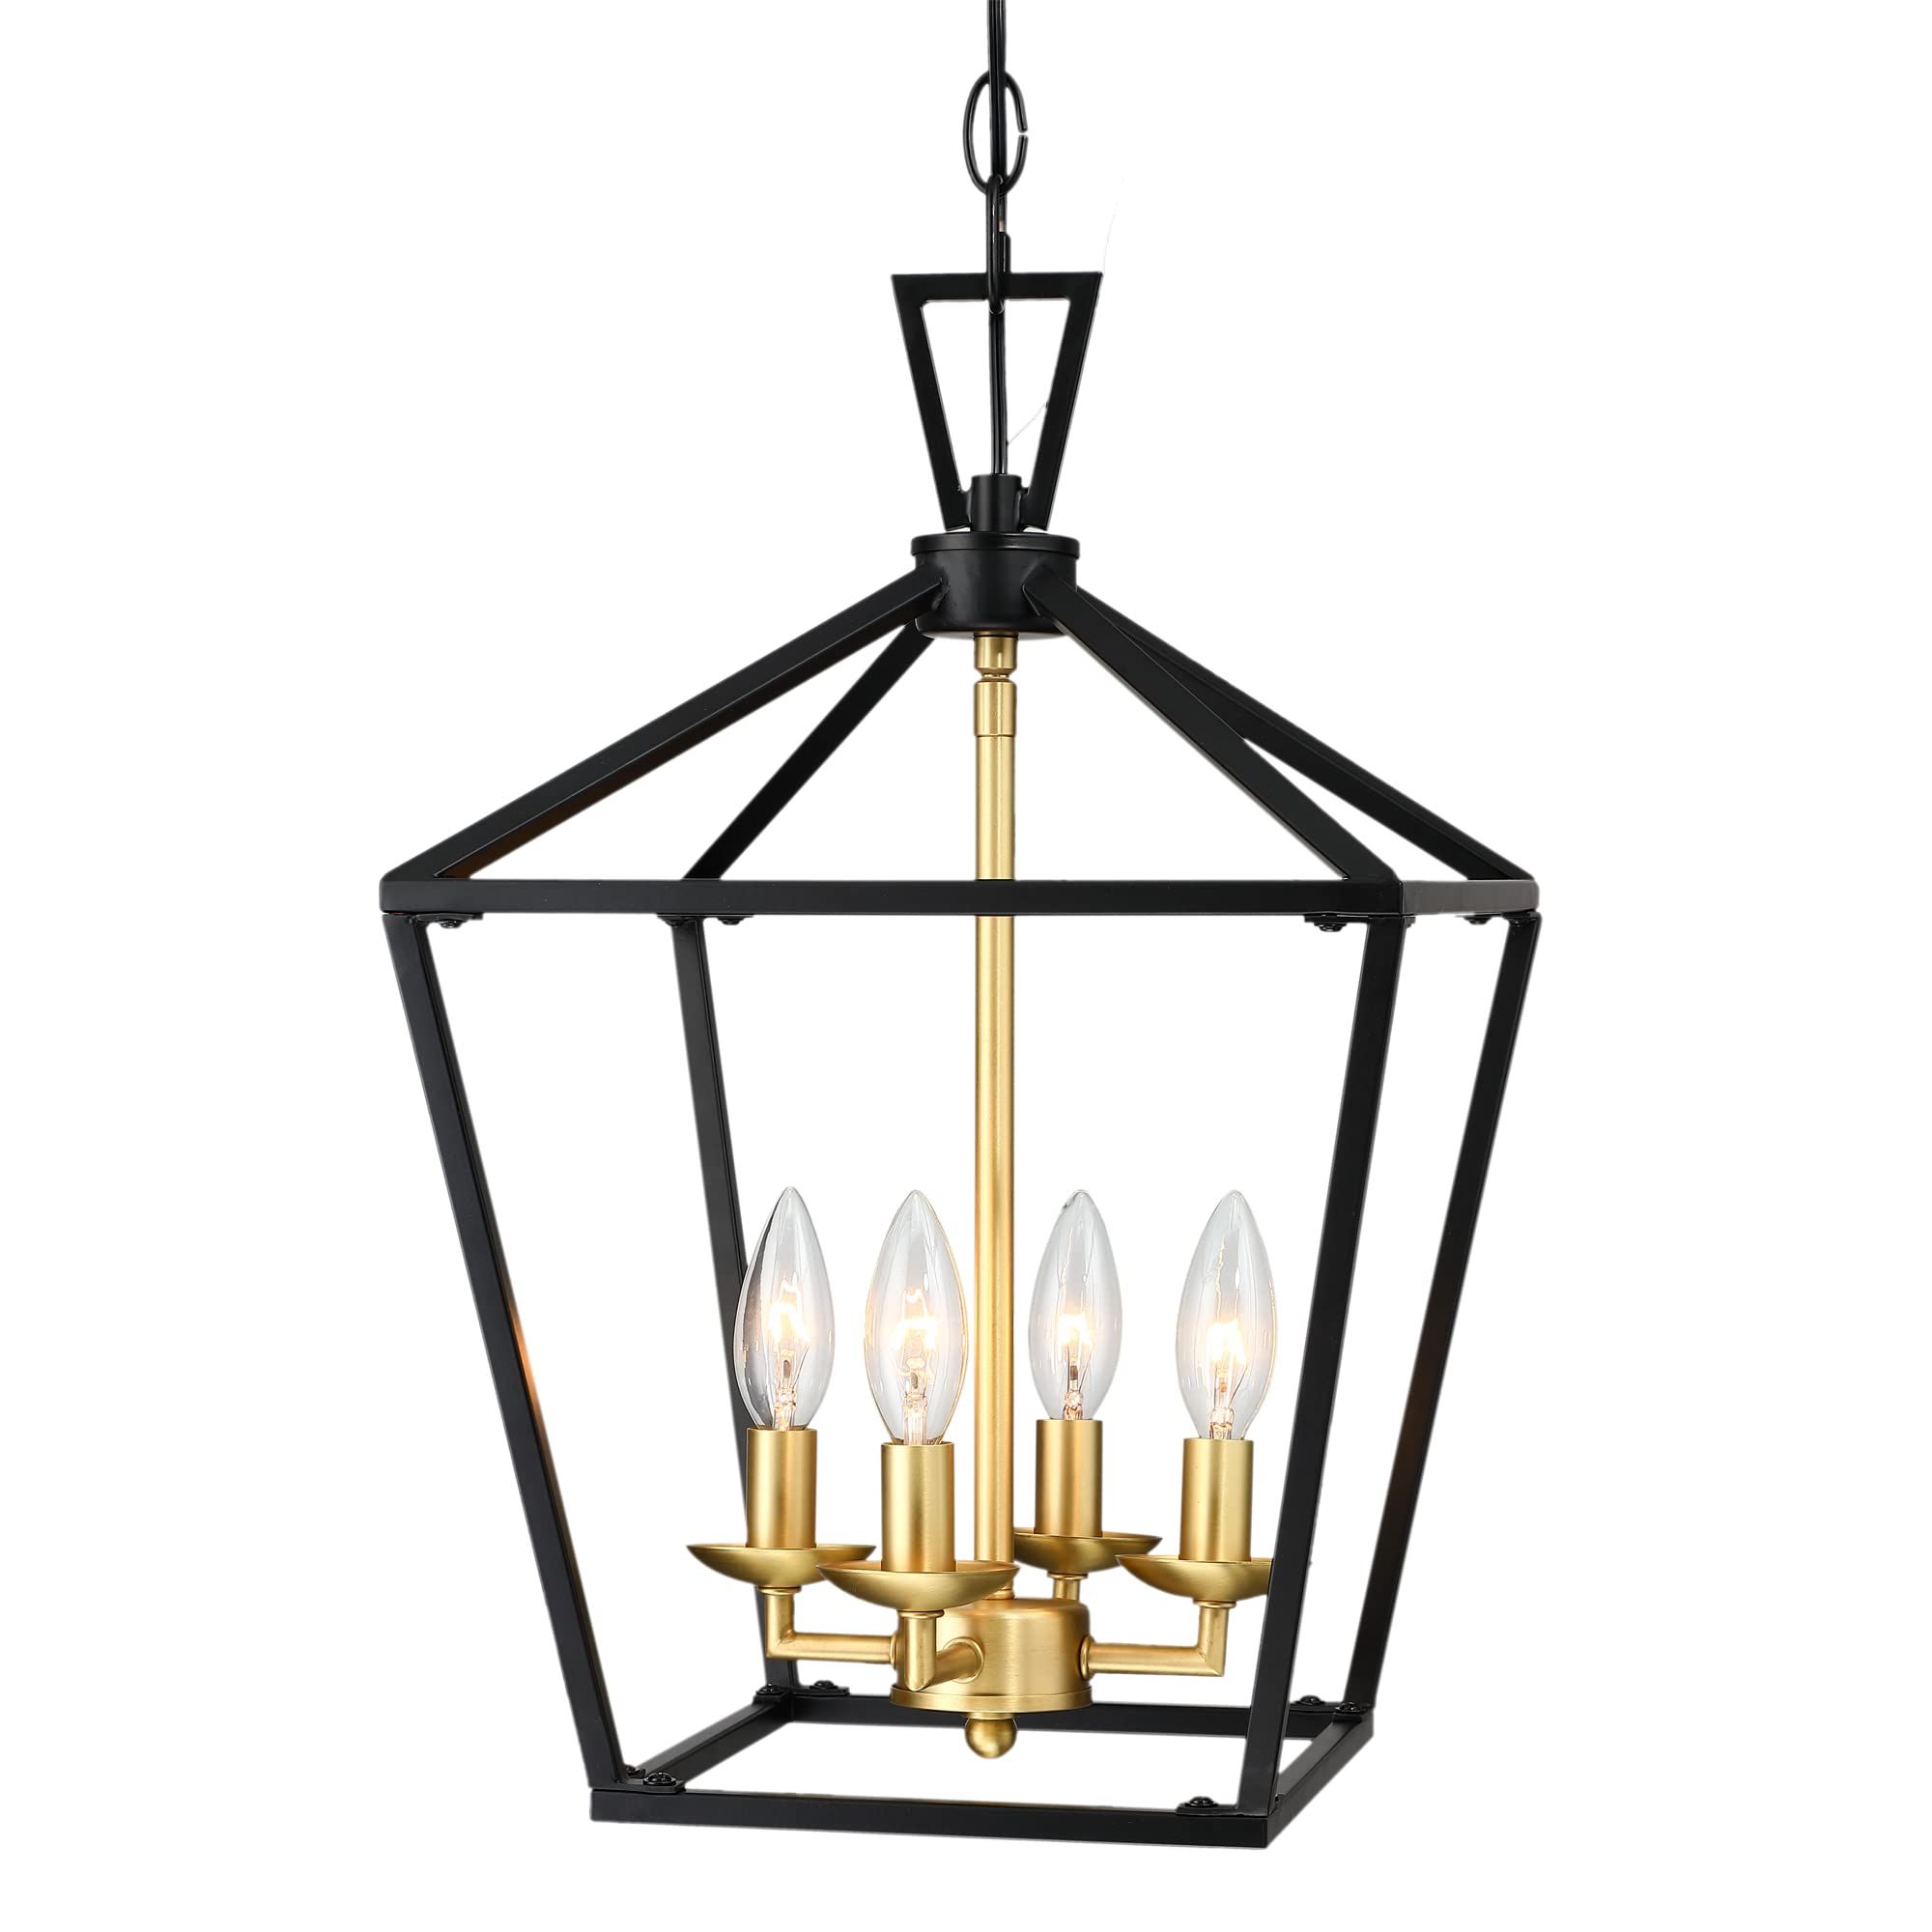 Aged Brass Lantern Chandeliers With Preferred Untrammelife 4 Light Lantern Pendant Light Black And Gold Brushed Brass  Kitchen Pendant Light Modern Geometric Chandelier Adjustable Chain Cage  Hanging Pendant Light Fixture For Foyer Dining Room – – Amazon (View 15 of 15)